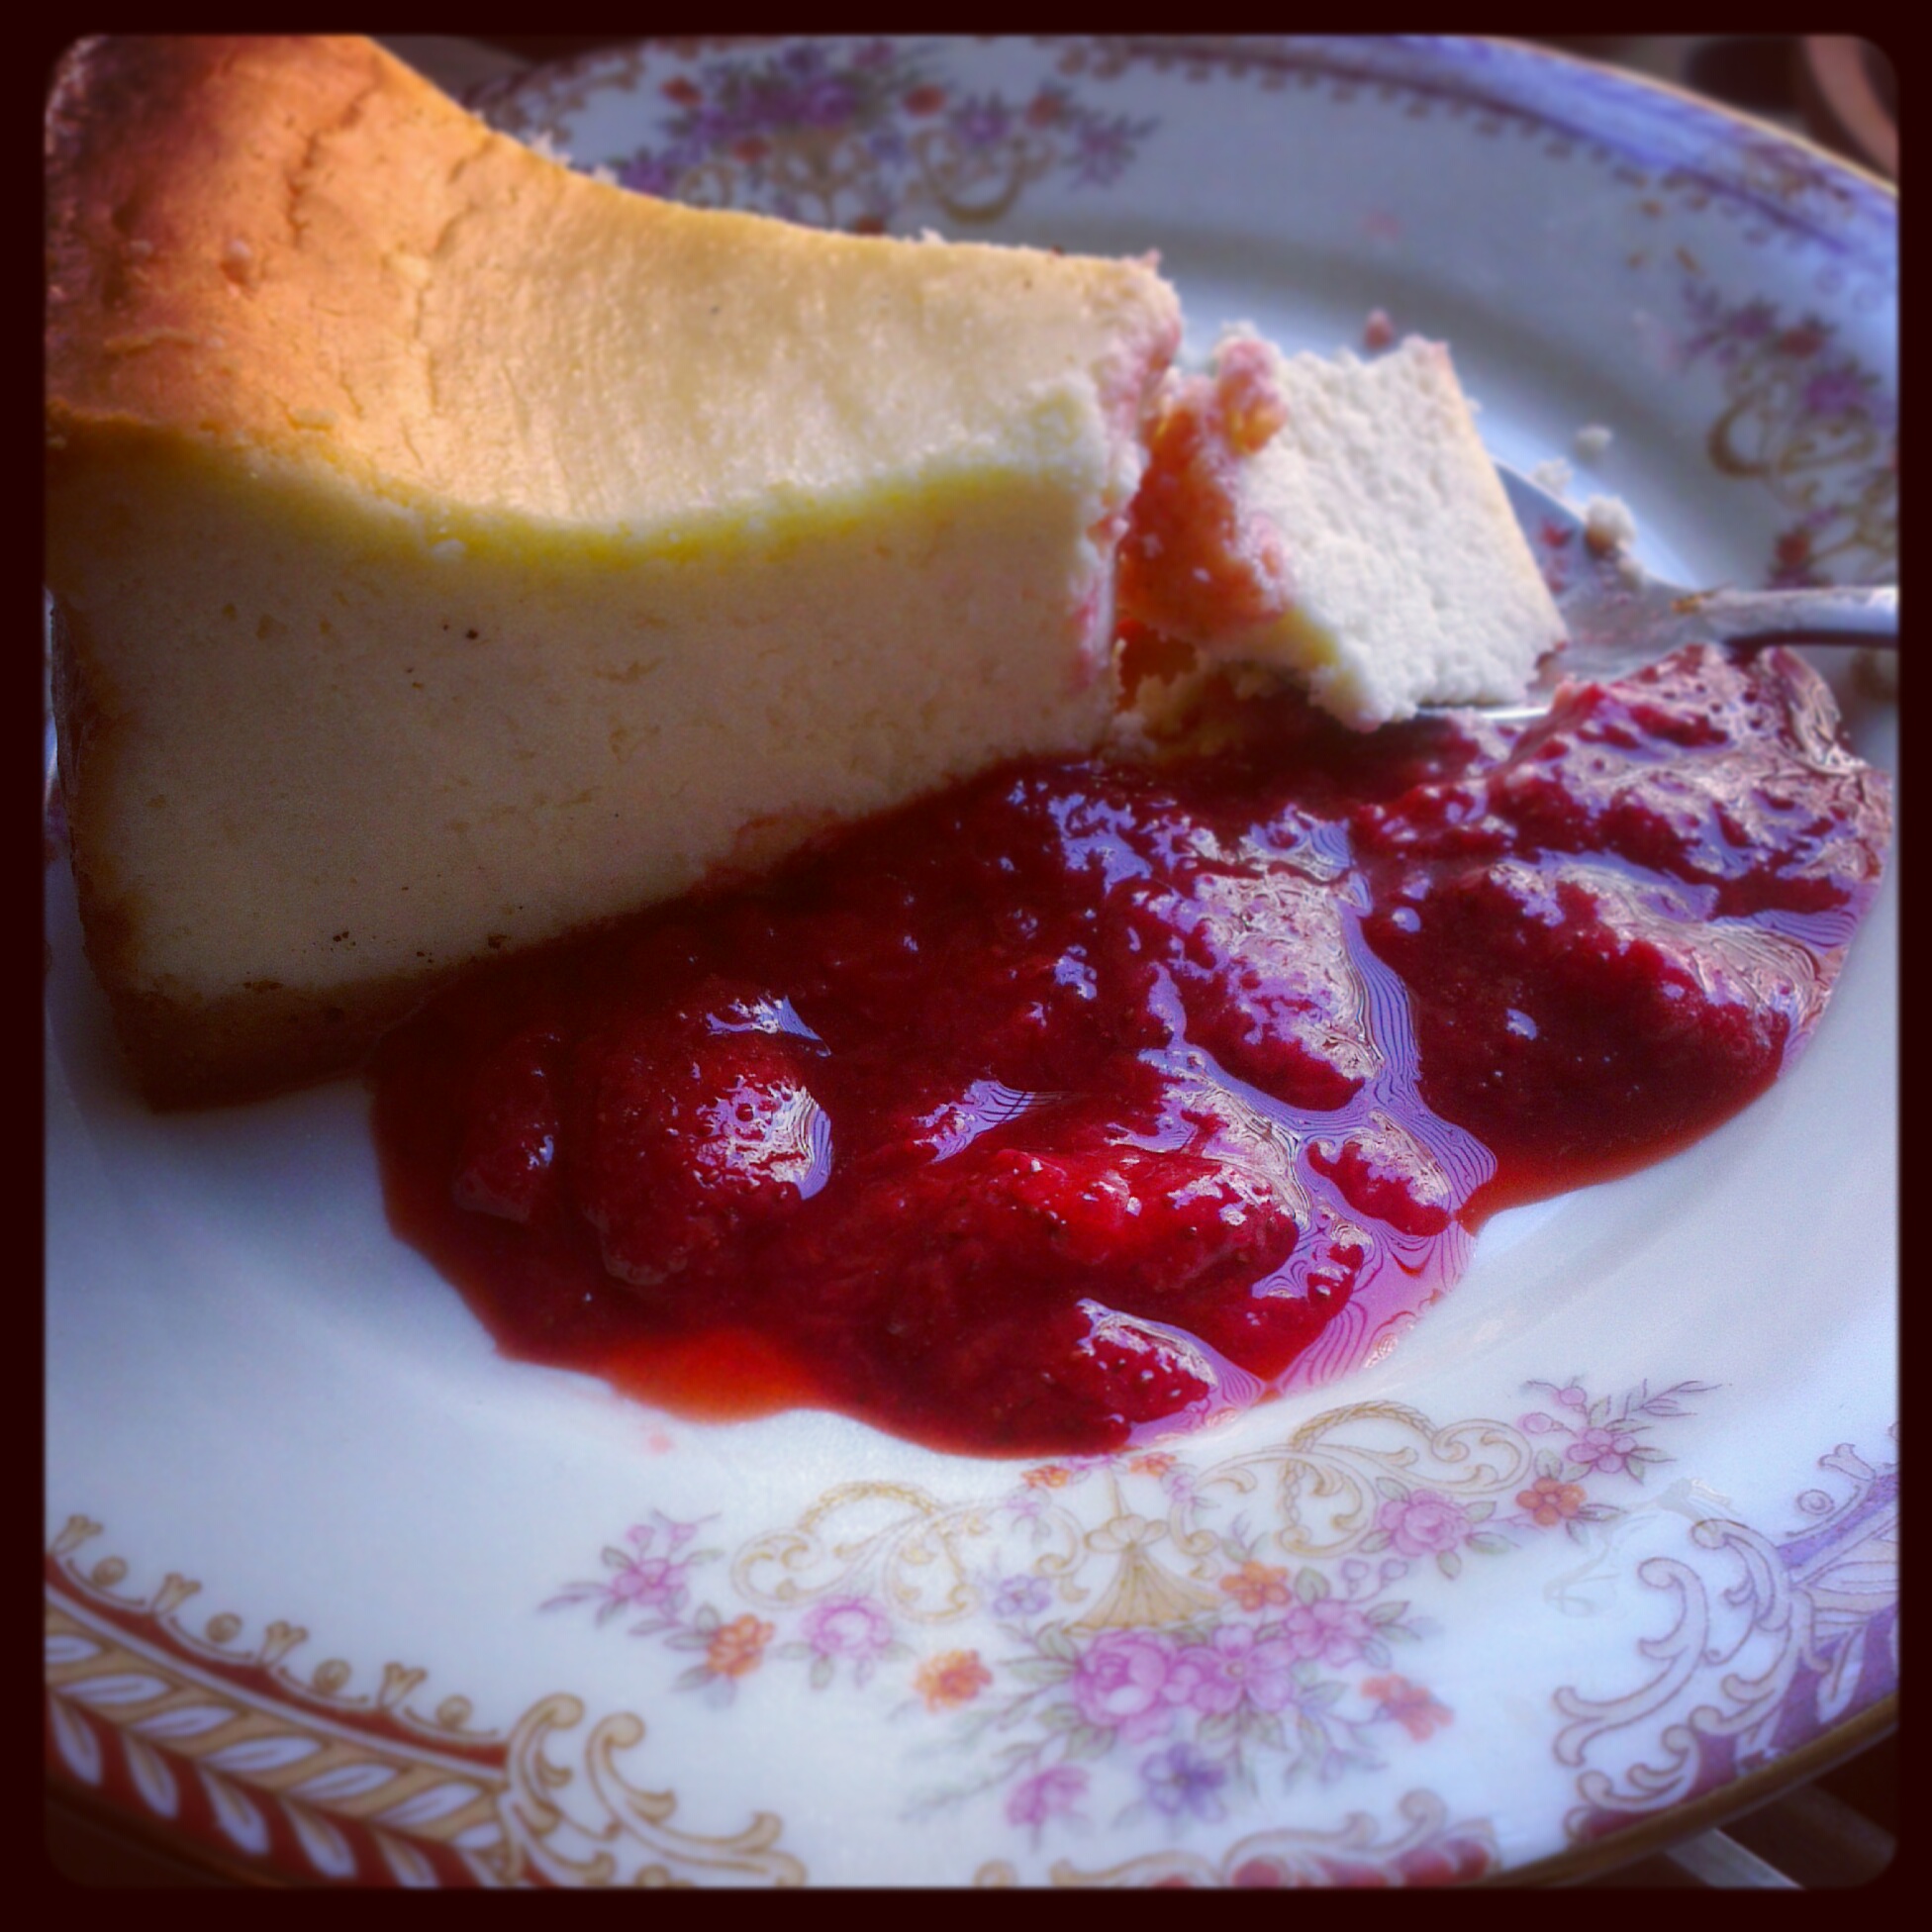 Baked cheesecake with a balsamic strawberry compote